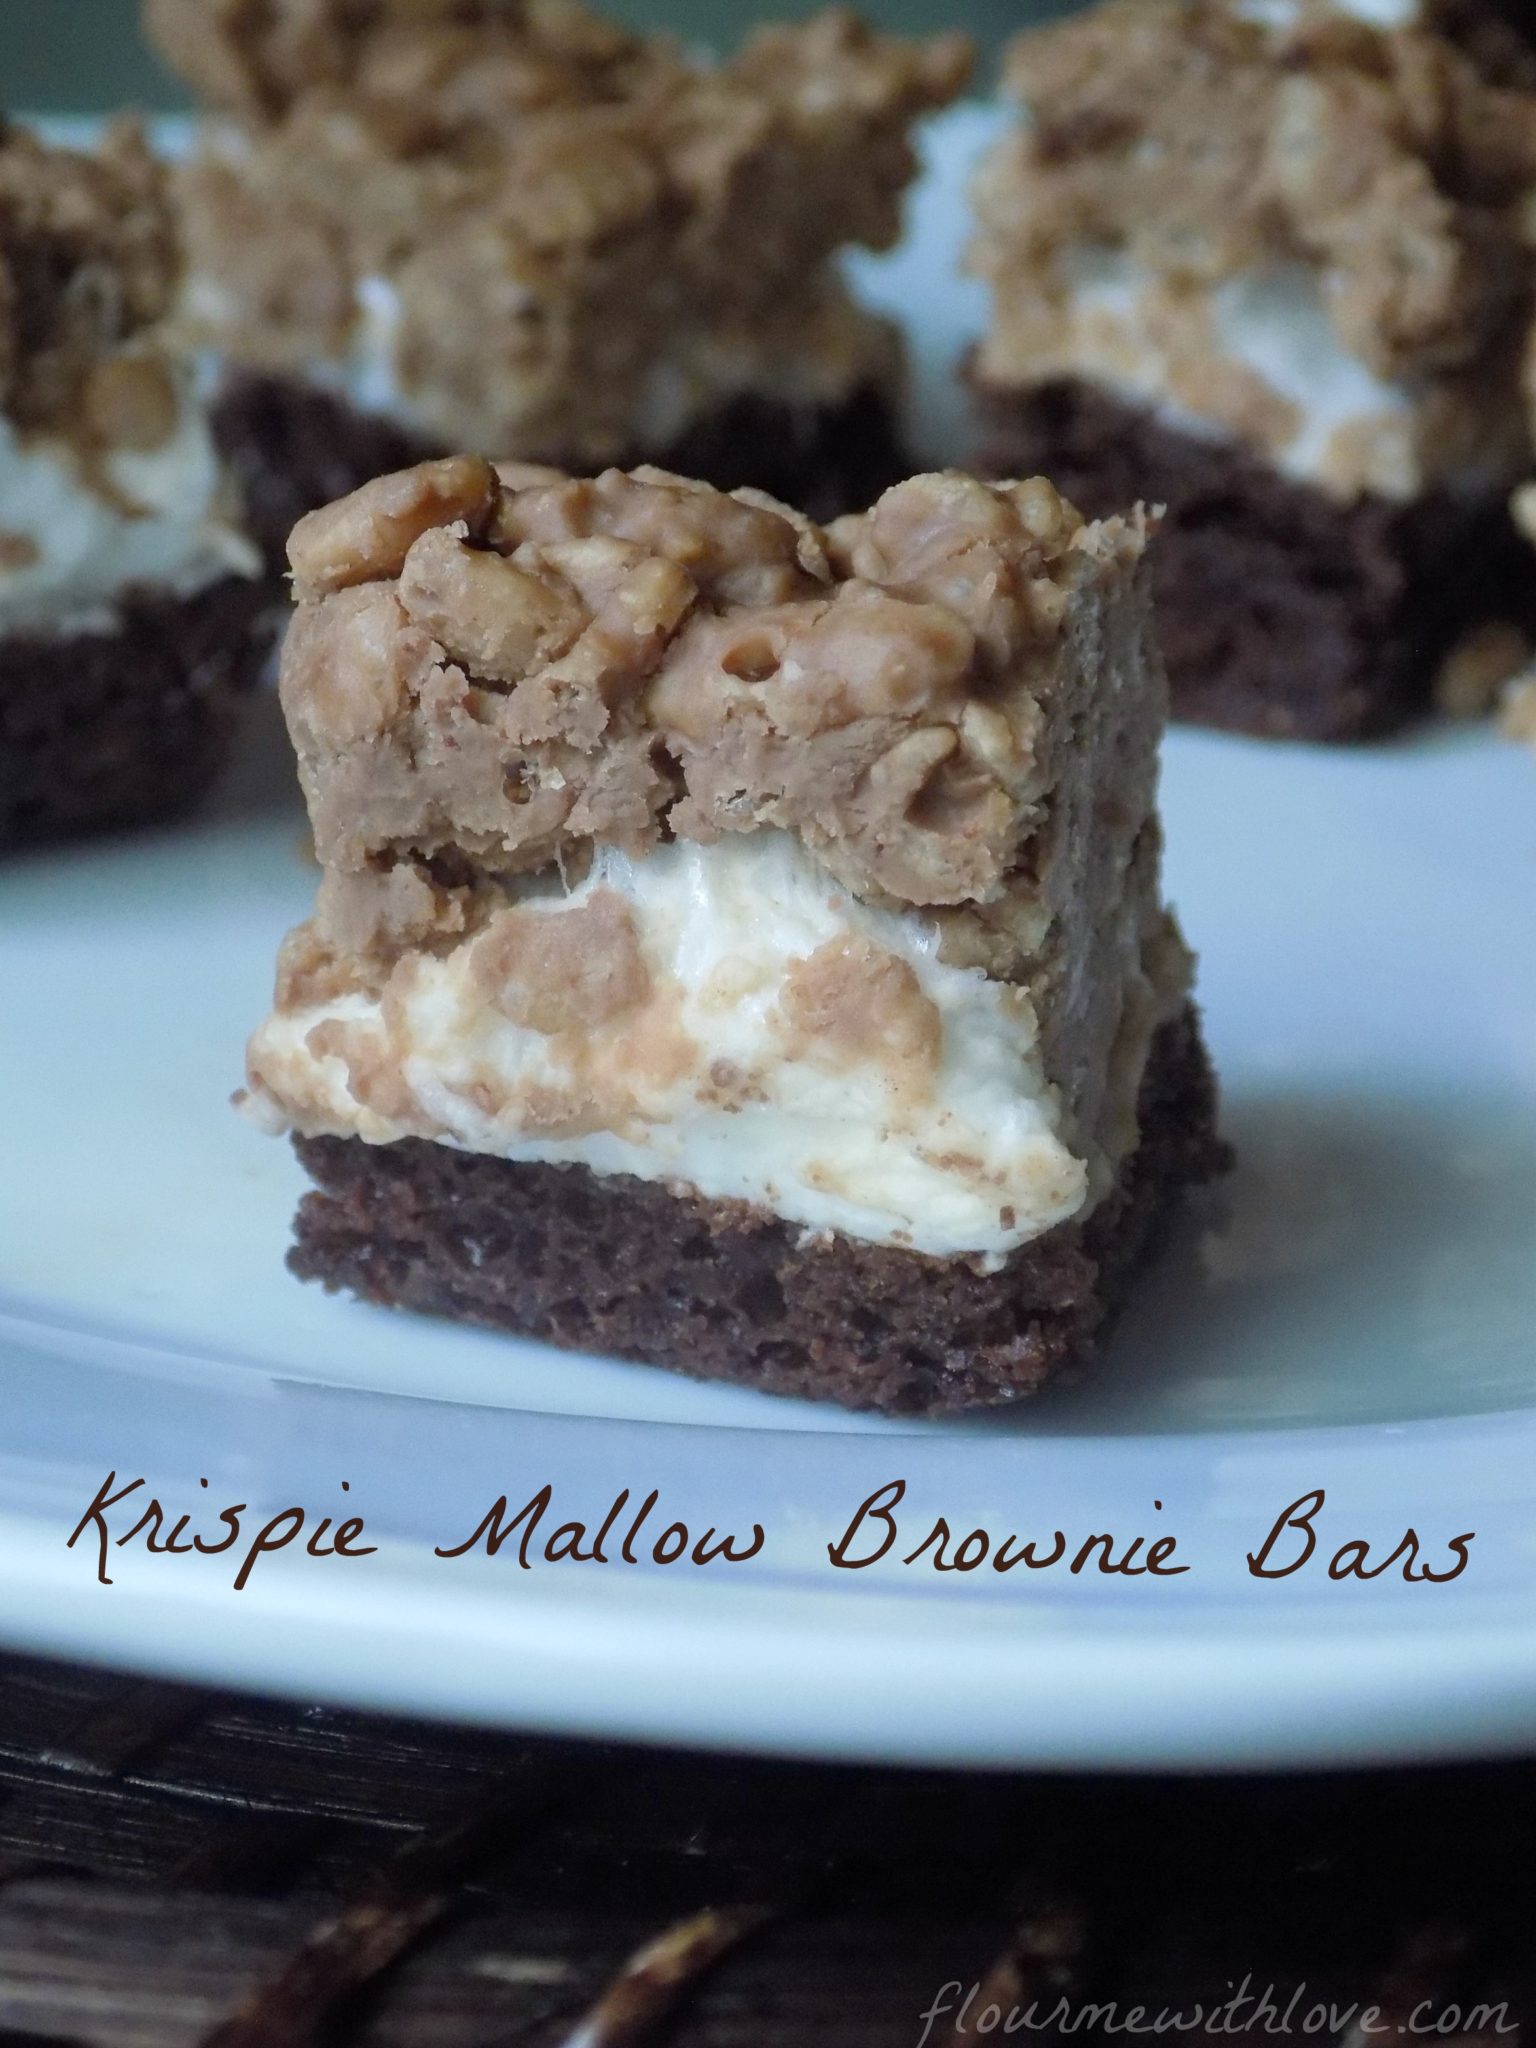 Layers of peanut butter krispie cereal, creamy marshmallows and chewy rich brownies make the perfect bar!